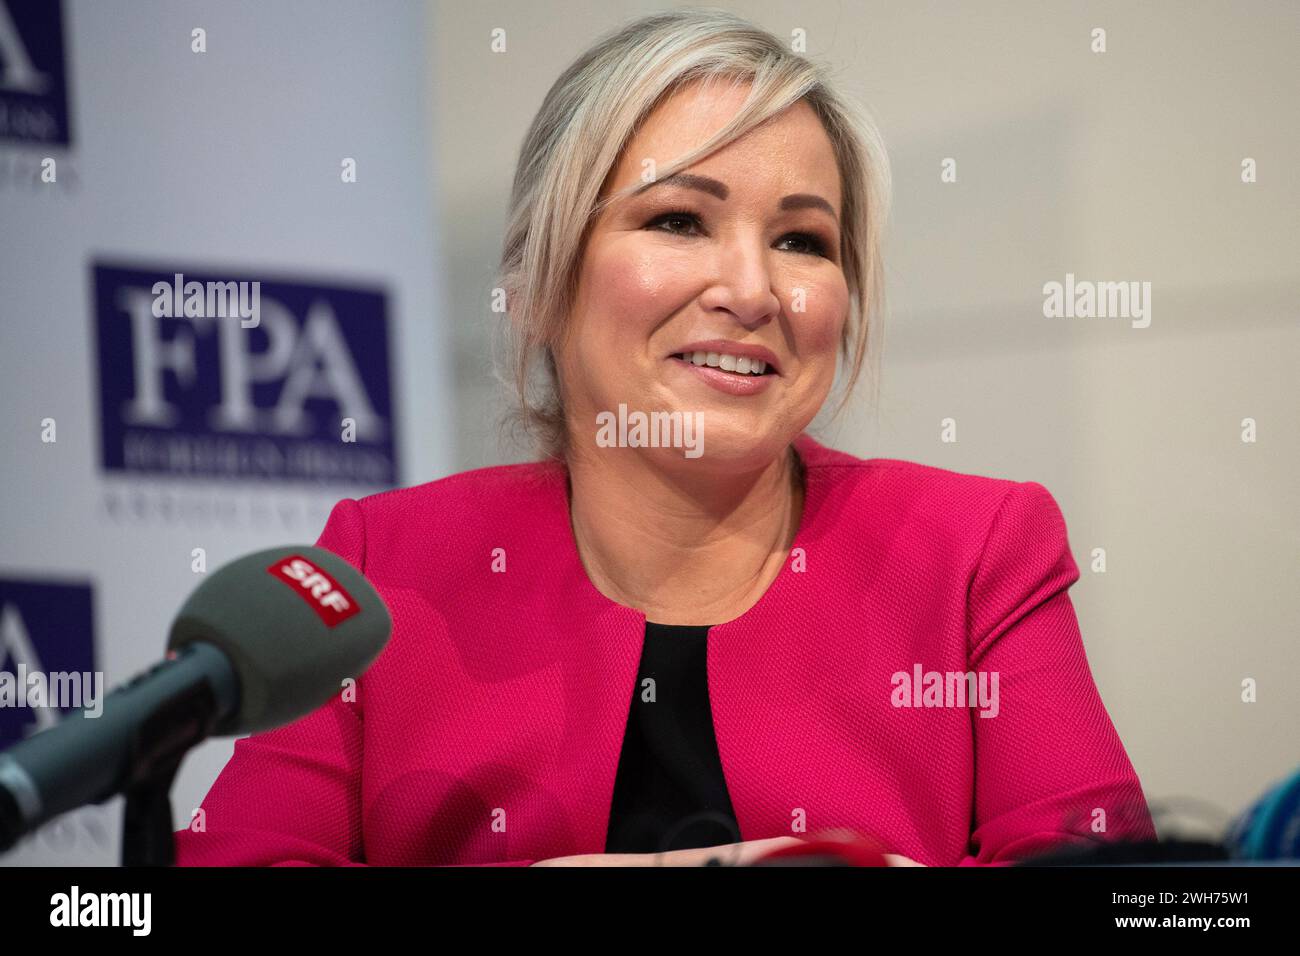 London, UK. 08 Feb 2024. Pictured: Newly elected Northern Ireland First Minister Michelle O'Neill speaks at a press conference organised by the The Foreign Press Association at The Royal Over-Seas League. Credit: Justin Ng/Alamy Stock Photo